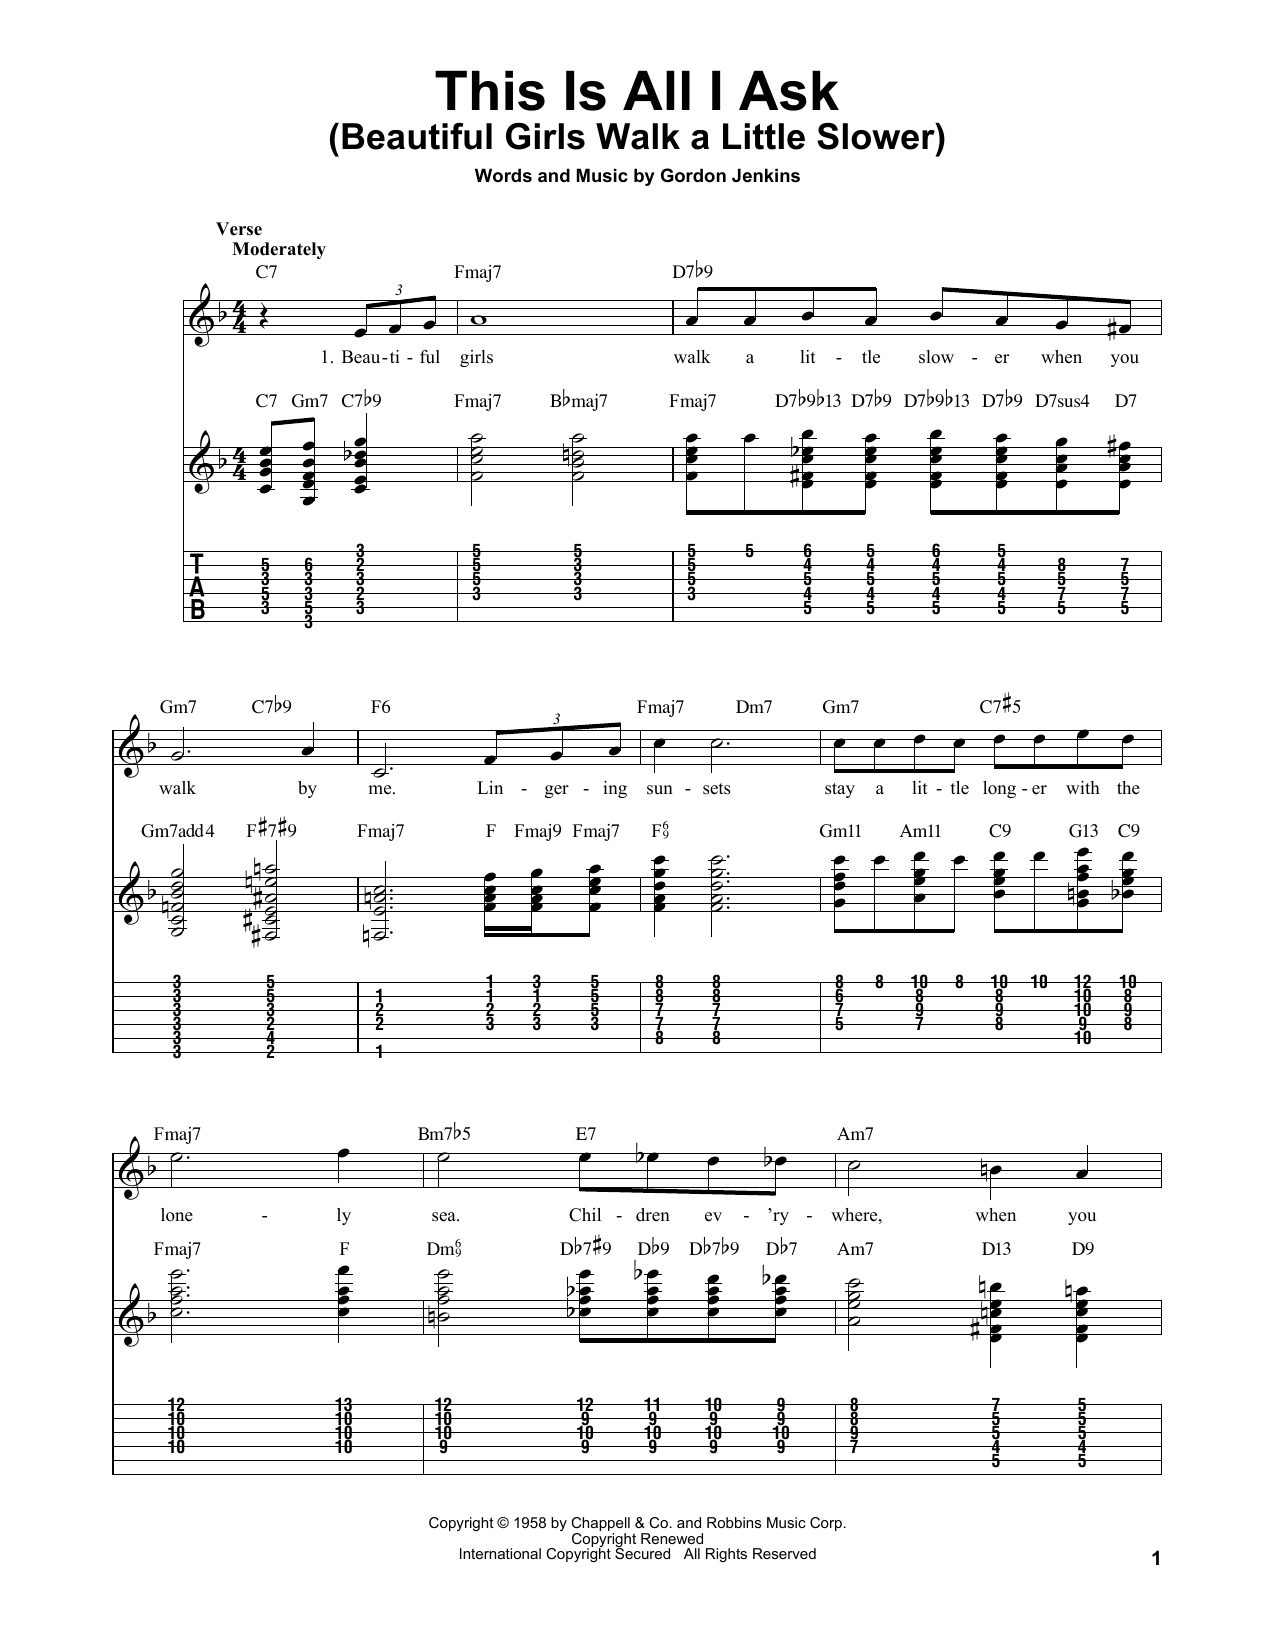 Gordon Jenkins This Is All I Ask (Beautiful Girls Walk A Little Slower) sheet music notes and chords. Download Printable PDF.